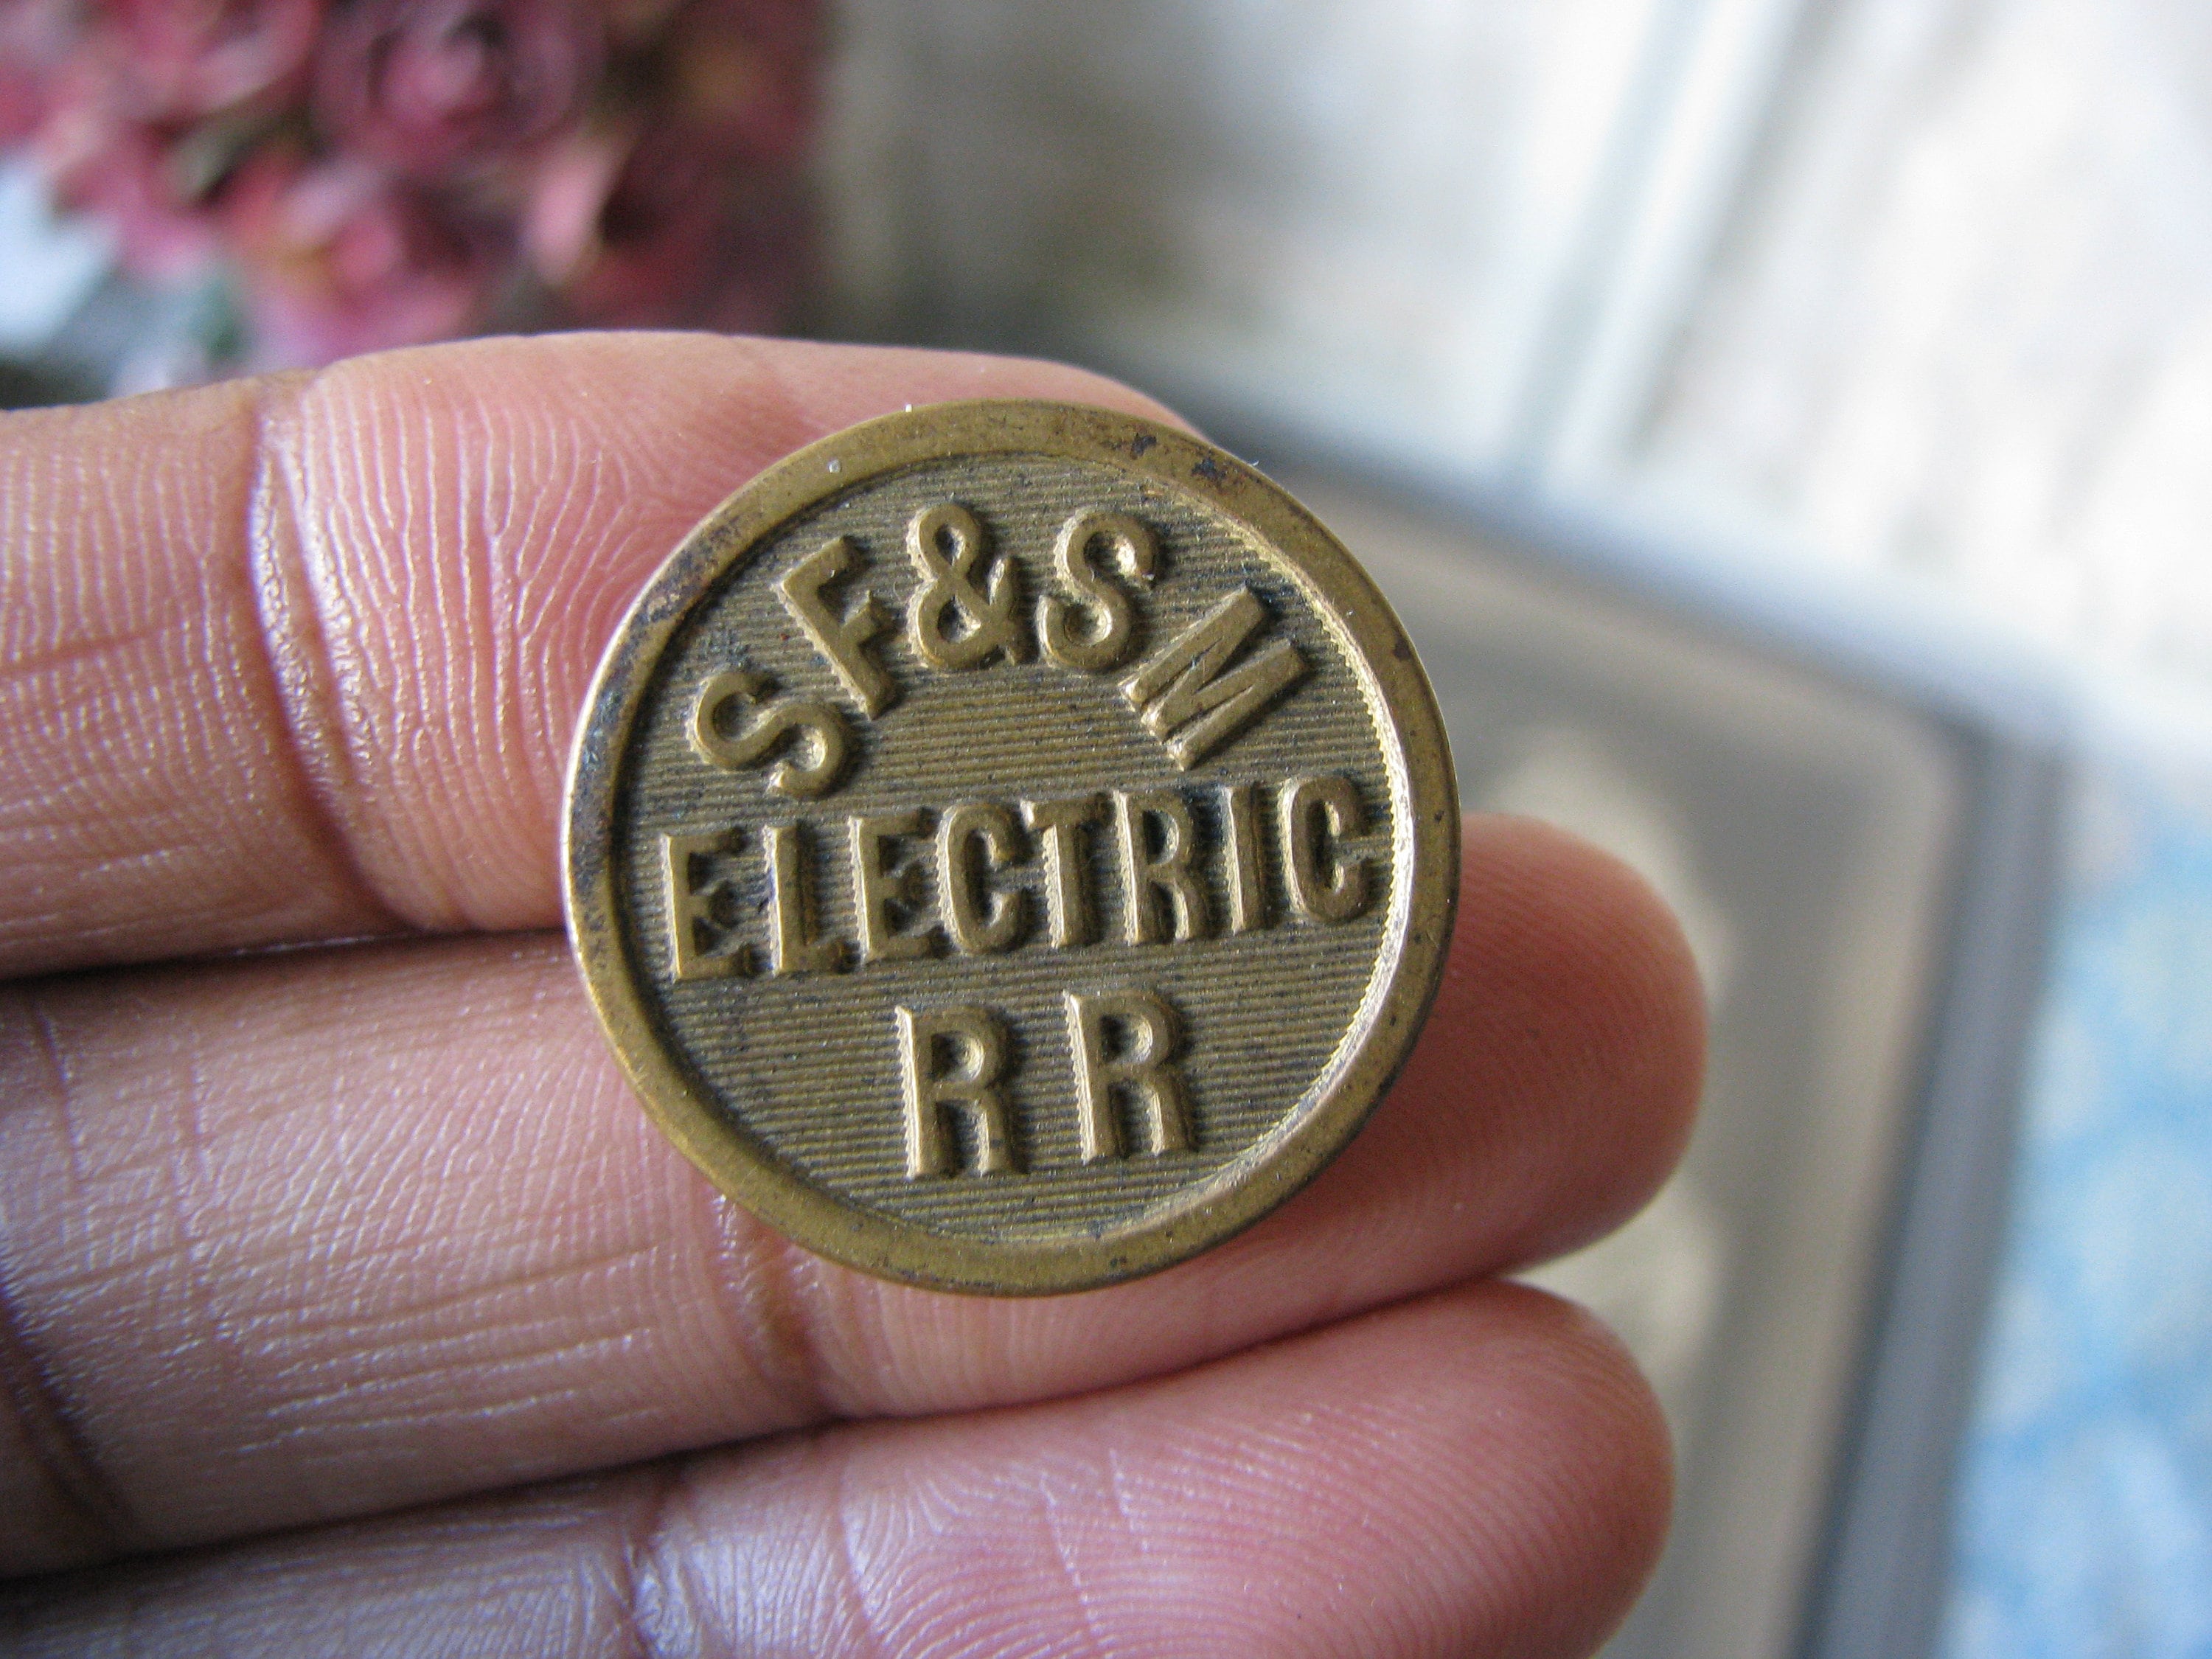 These are original 5/8" old Union Pacific uniform buttons